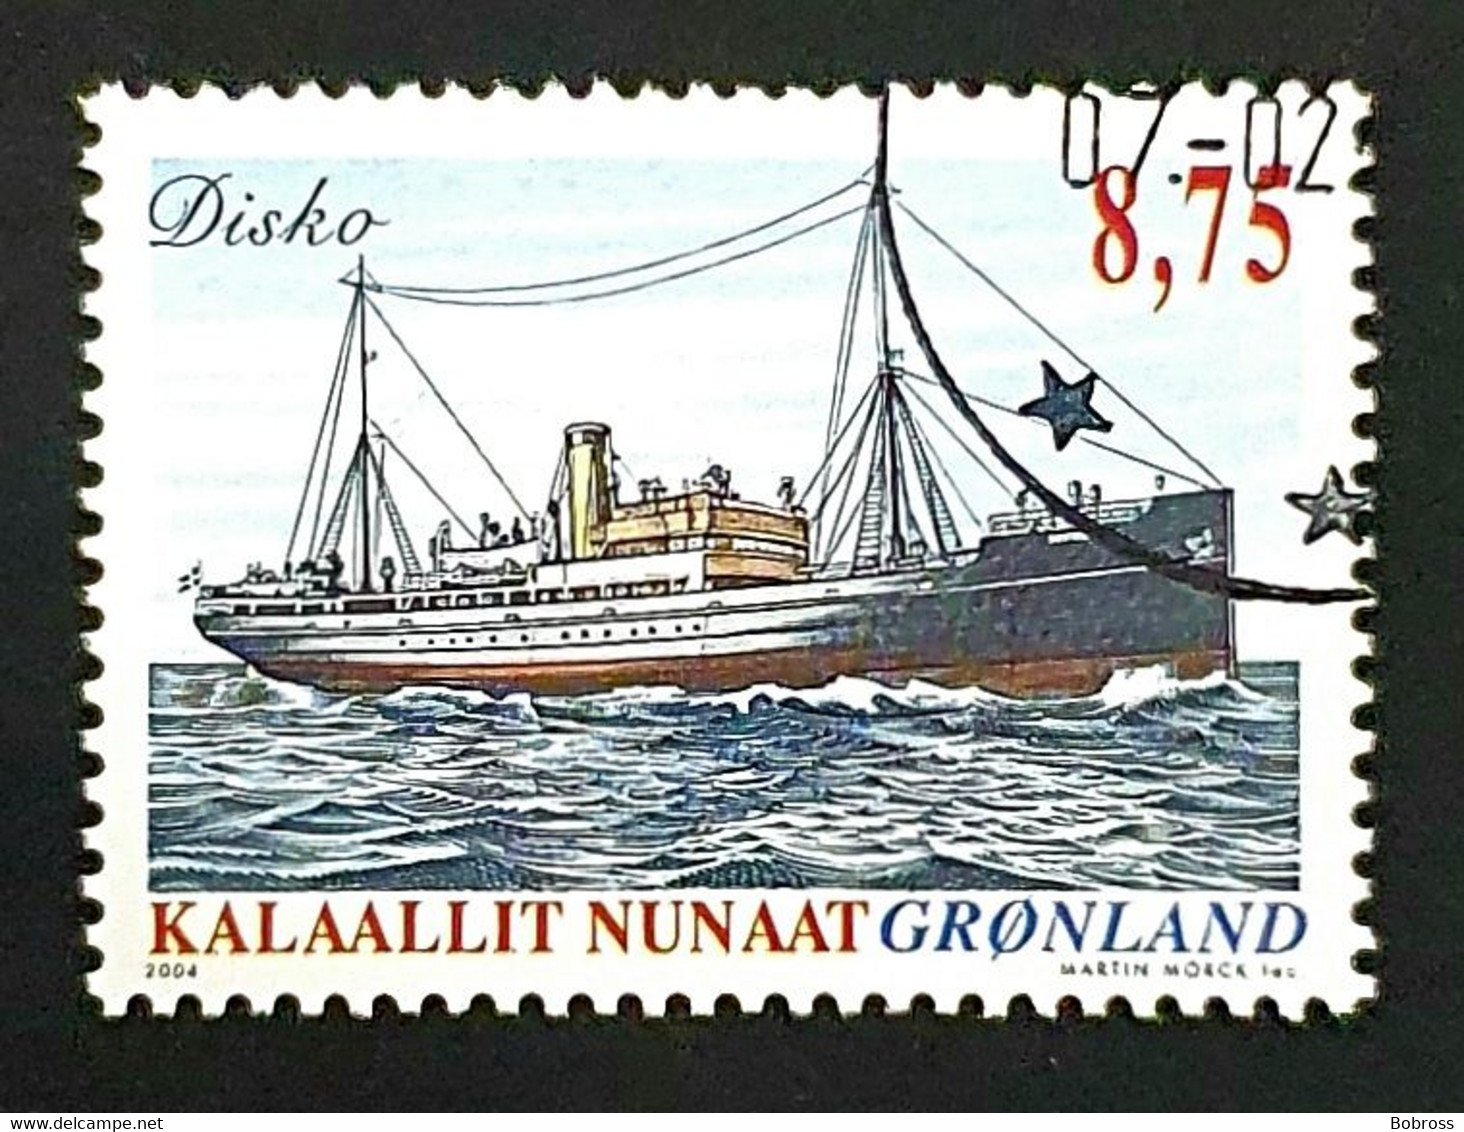 2004 Greenland Navigation, Ships, Boats, Greenland, Used - Used Stamps